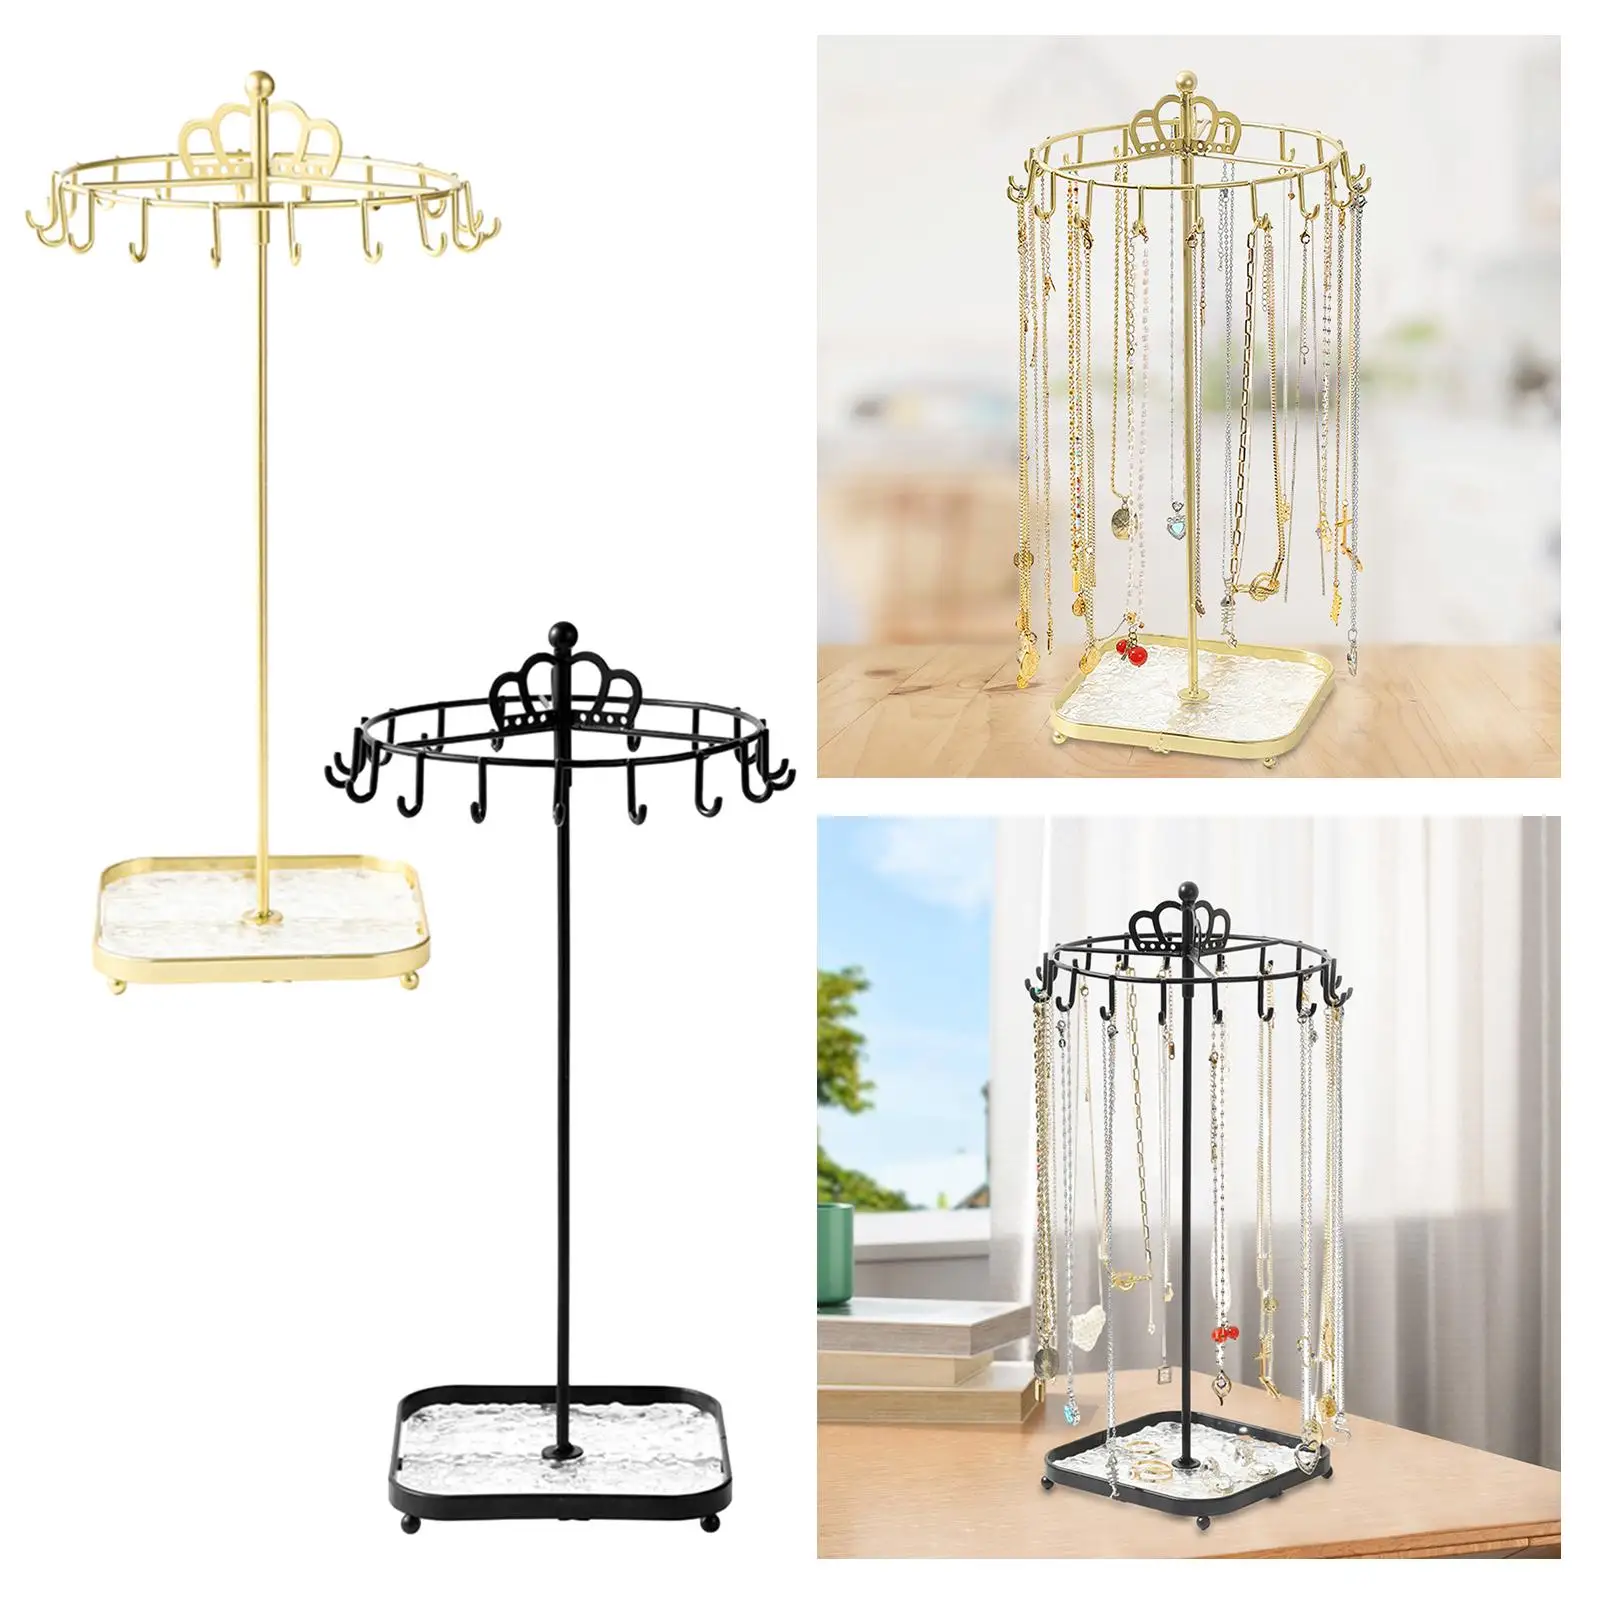 Rotating Jewelry Holder Jewelry Display Rack Necklace Earring Storage Shelf Jewelry Organizer for Necklace Earrings Tabletop